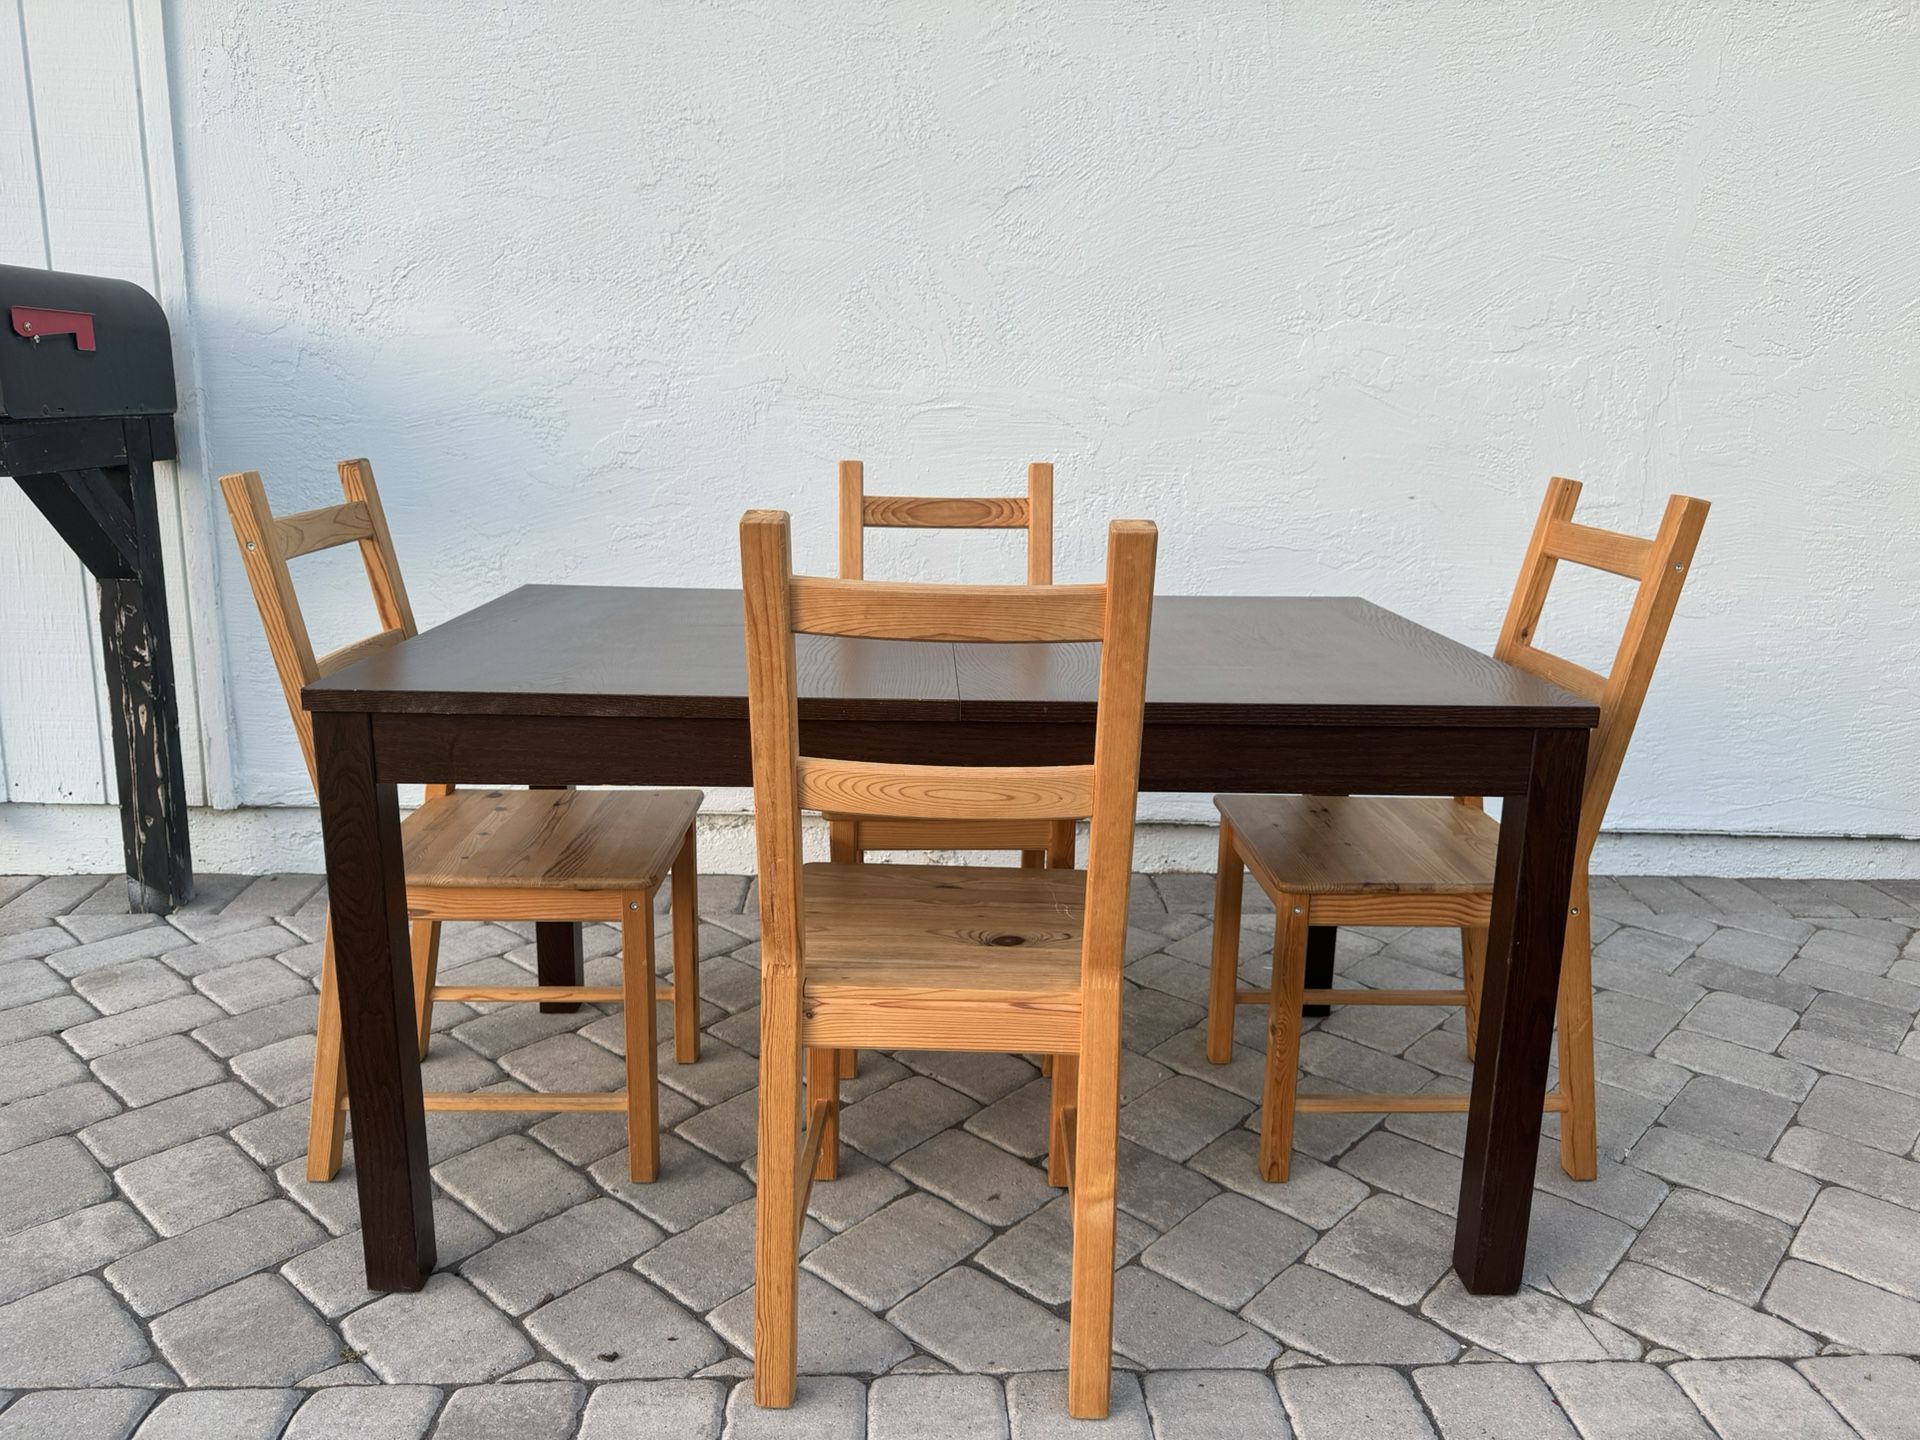 Extendable Ikea dining table with 4 chairs